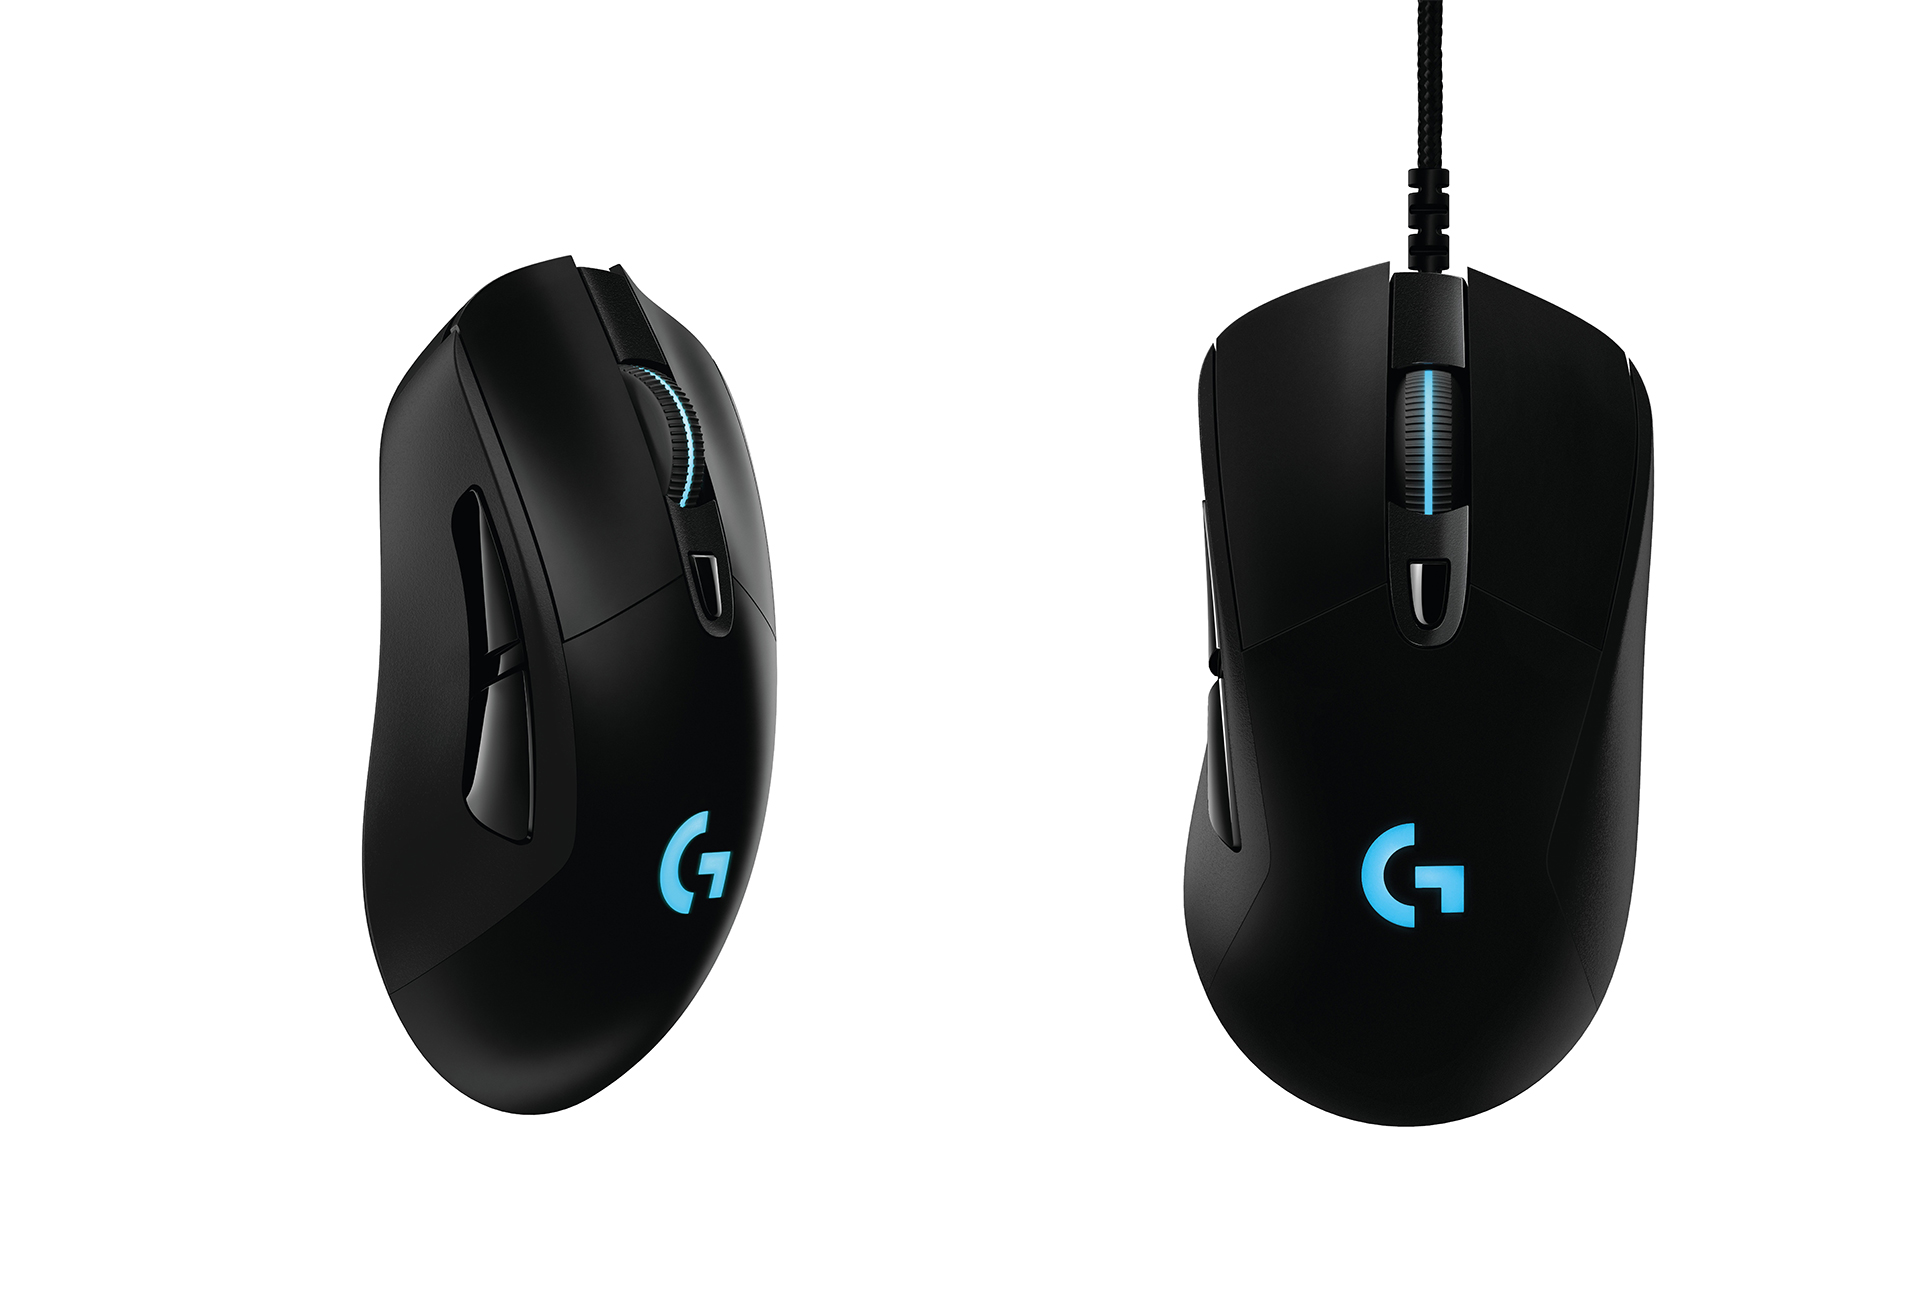 Logitech’s Prodigy Series Wants To Be Everybody’s Gaming Gear